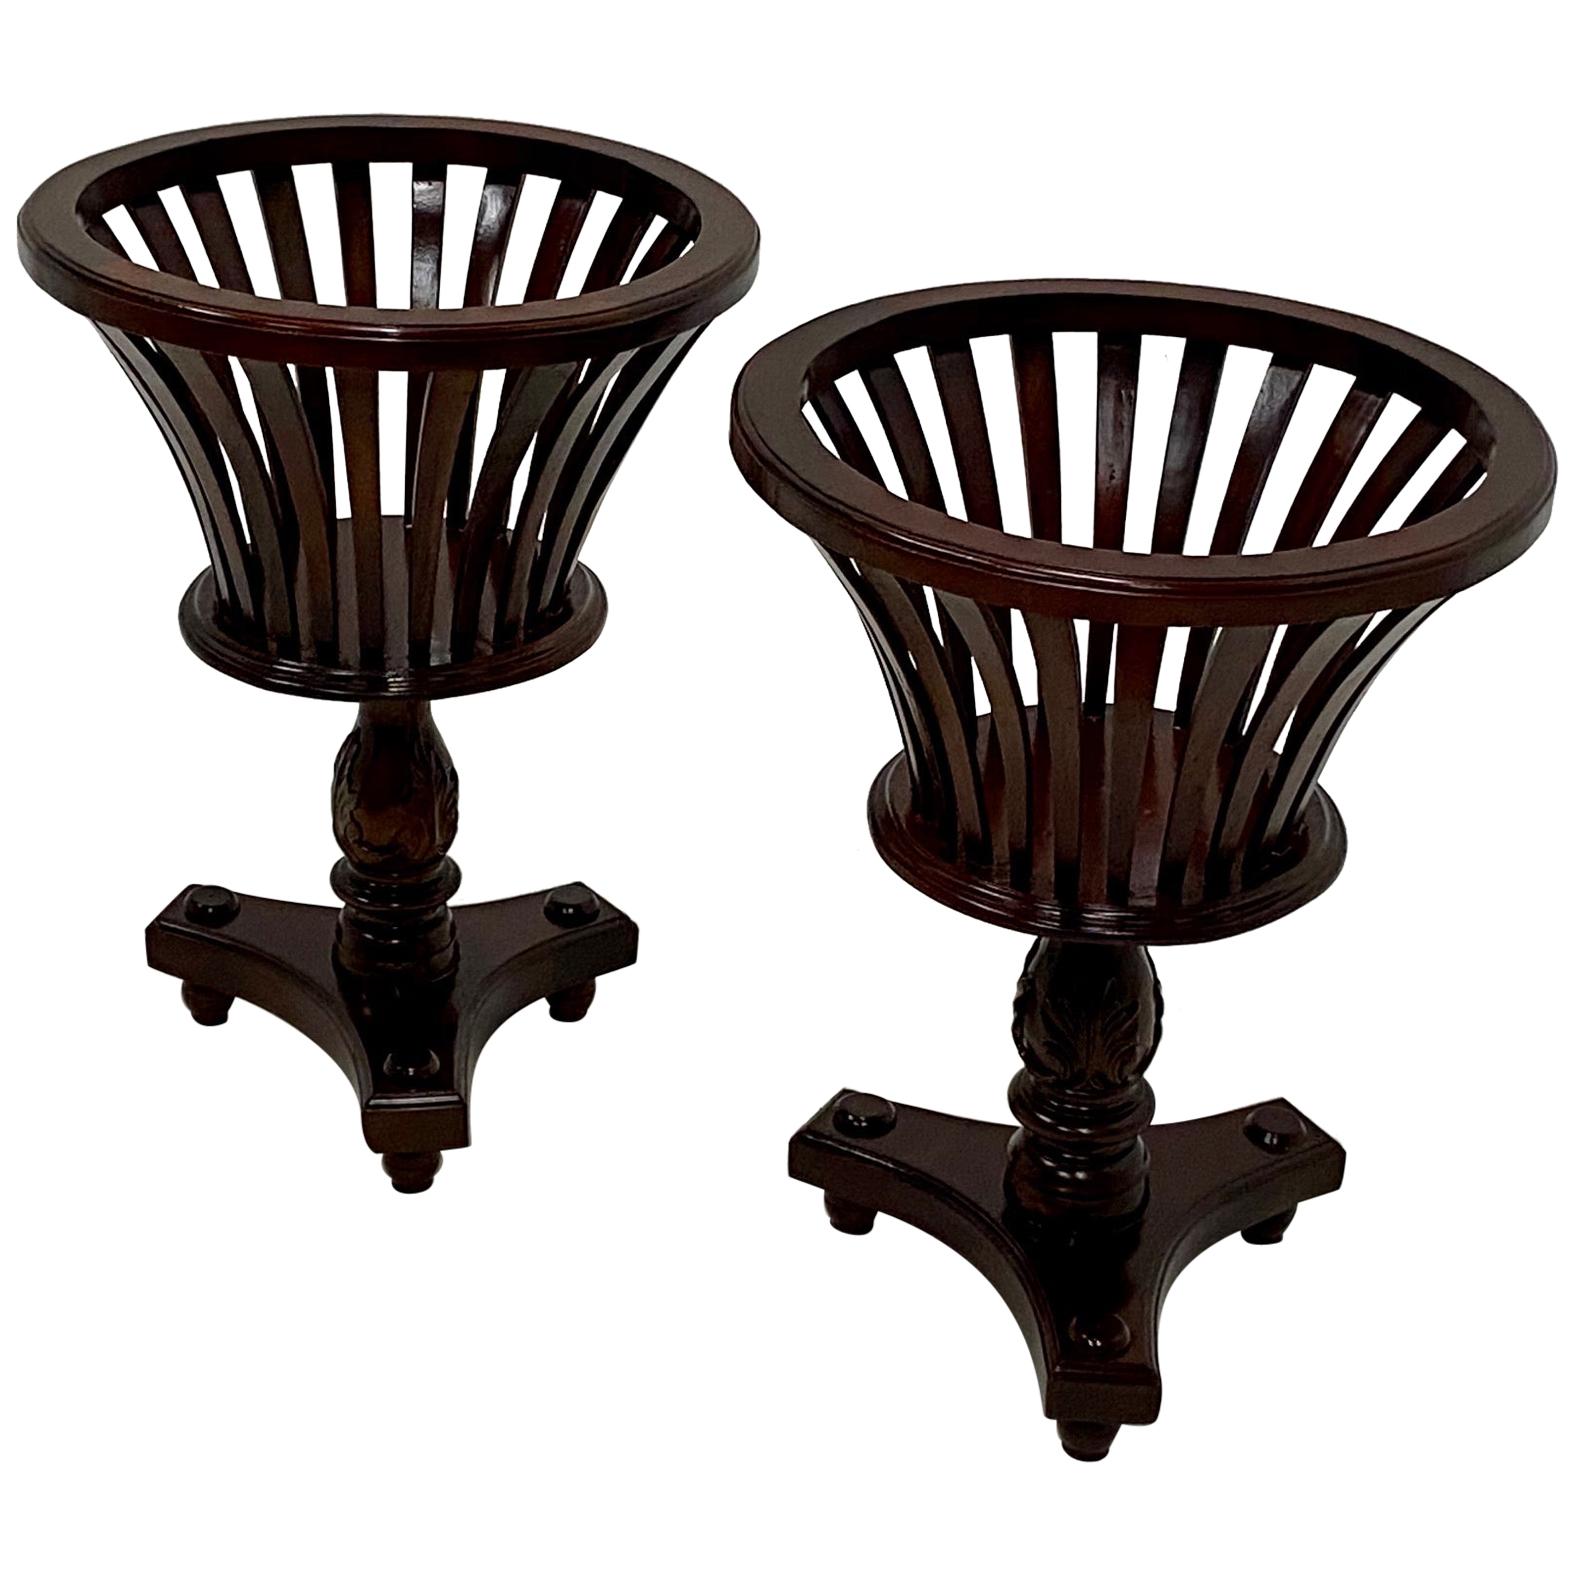 Elegant Pair of Regency Style Pierced Carved Mahogany Plant Stands